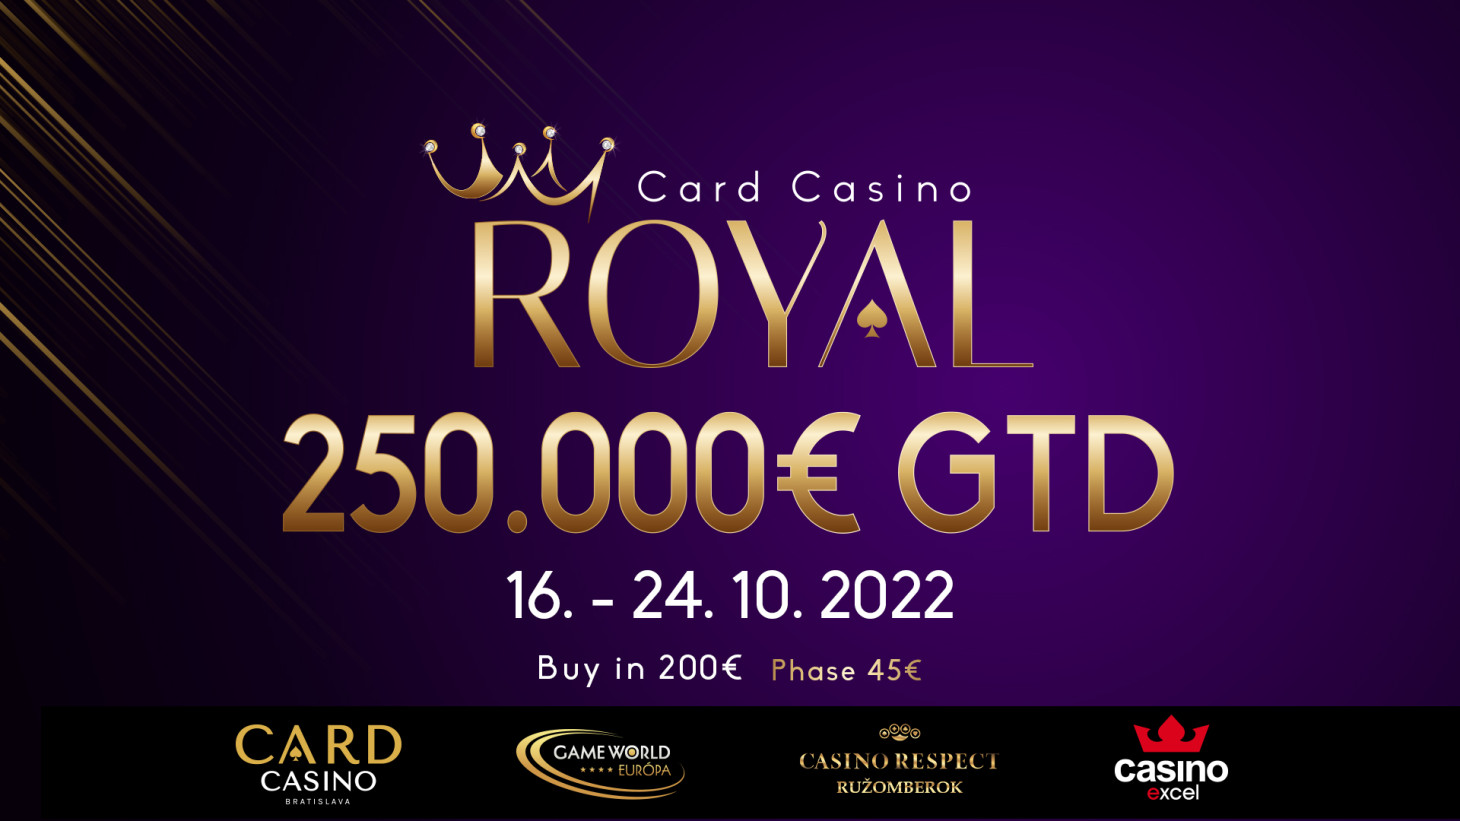 Unique Card Casino ROYAL €250,000 GTD to play flights across Slovakia